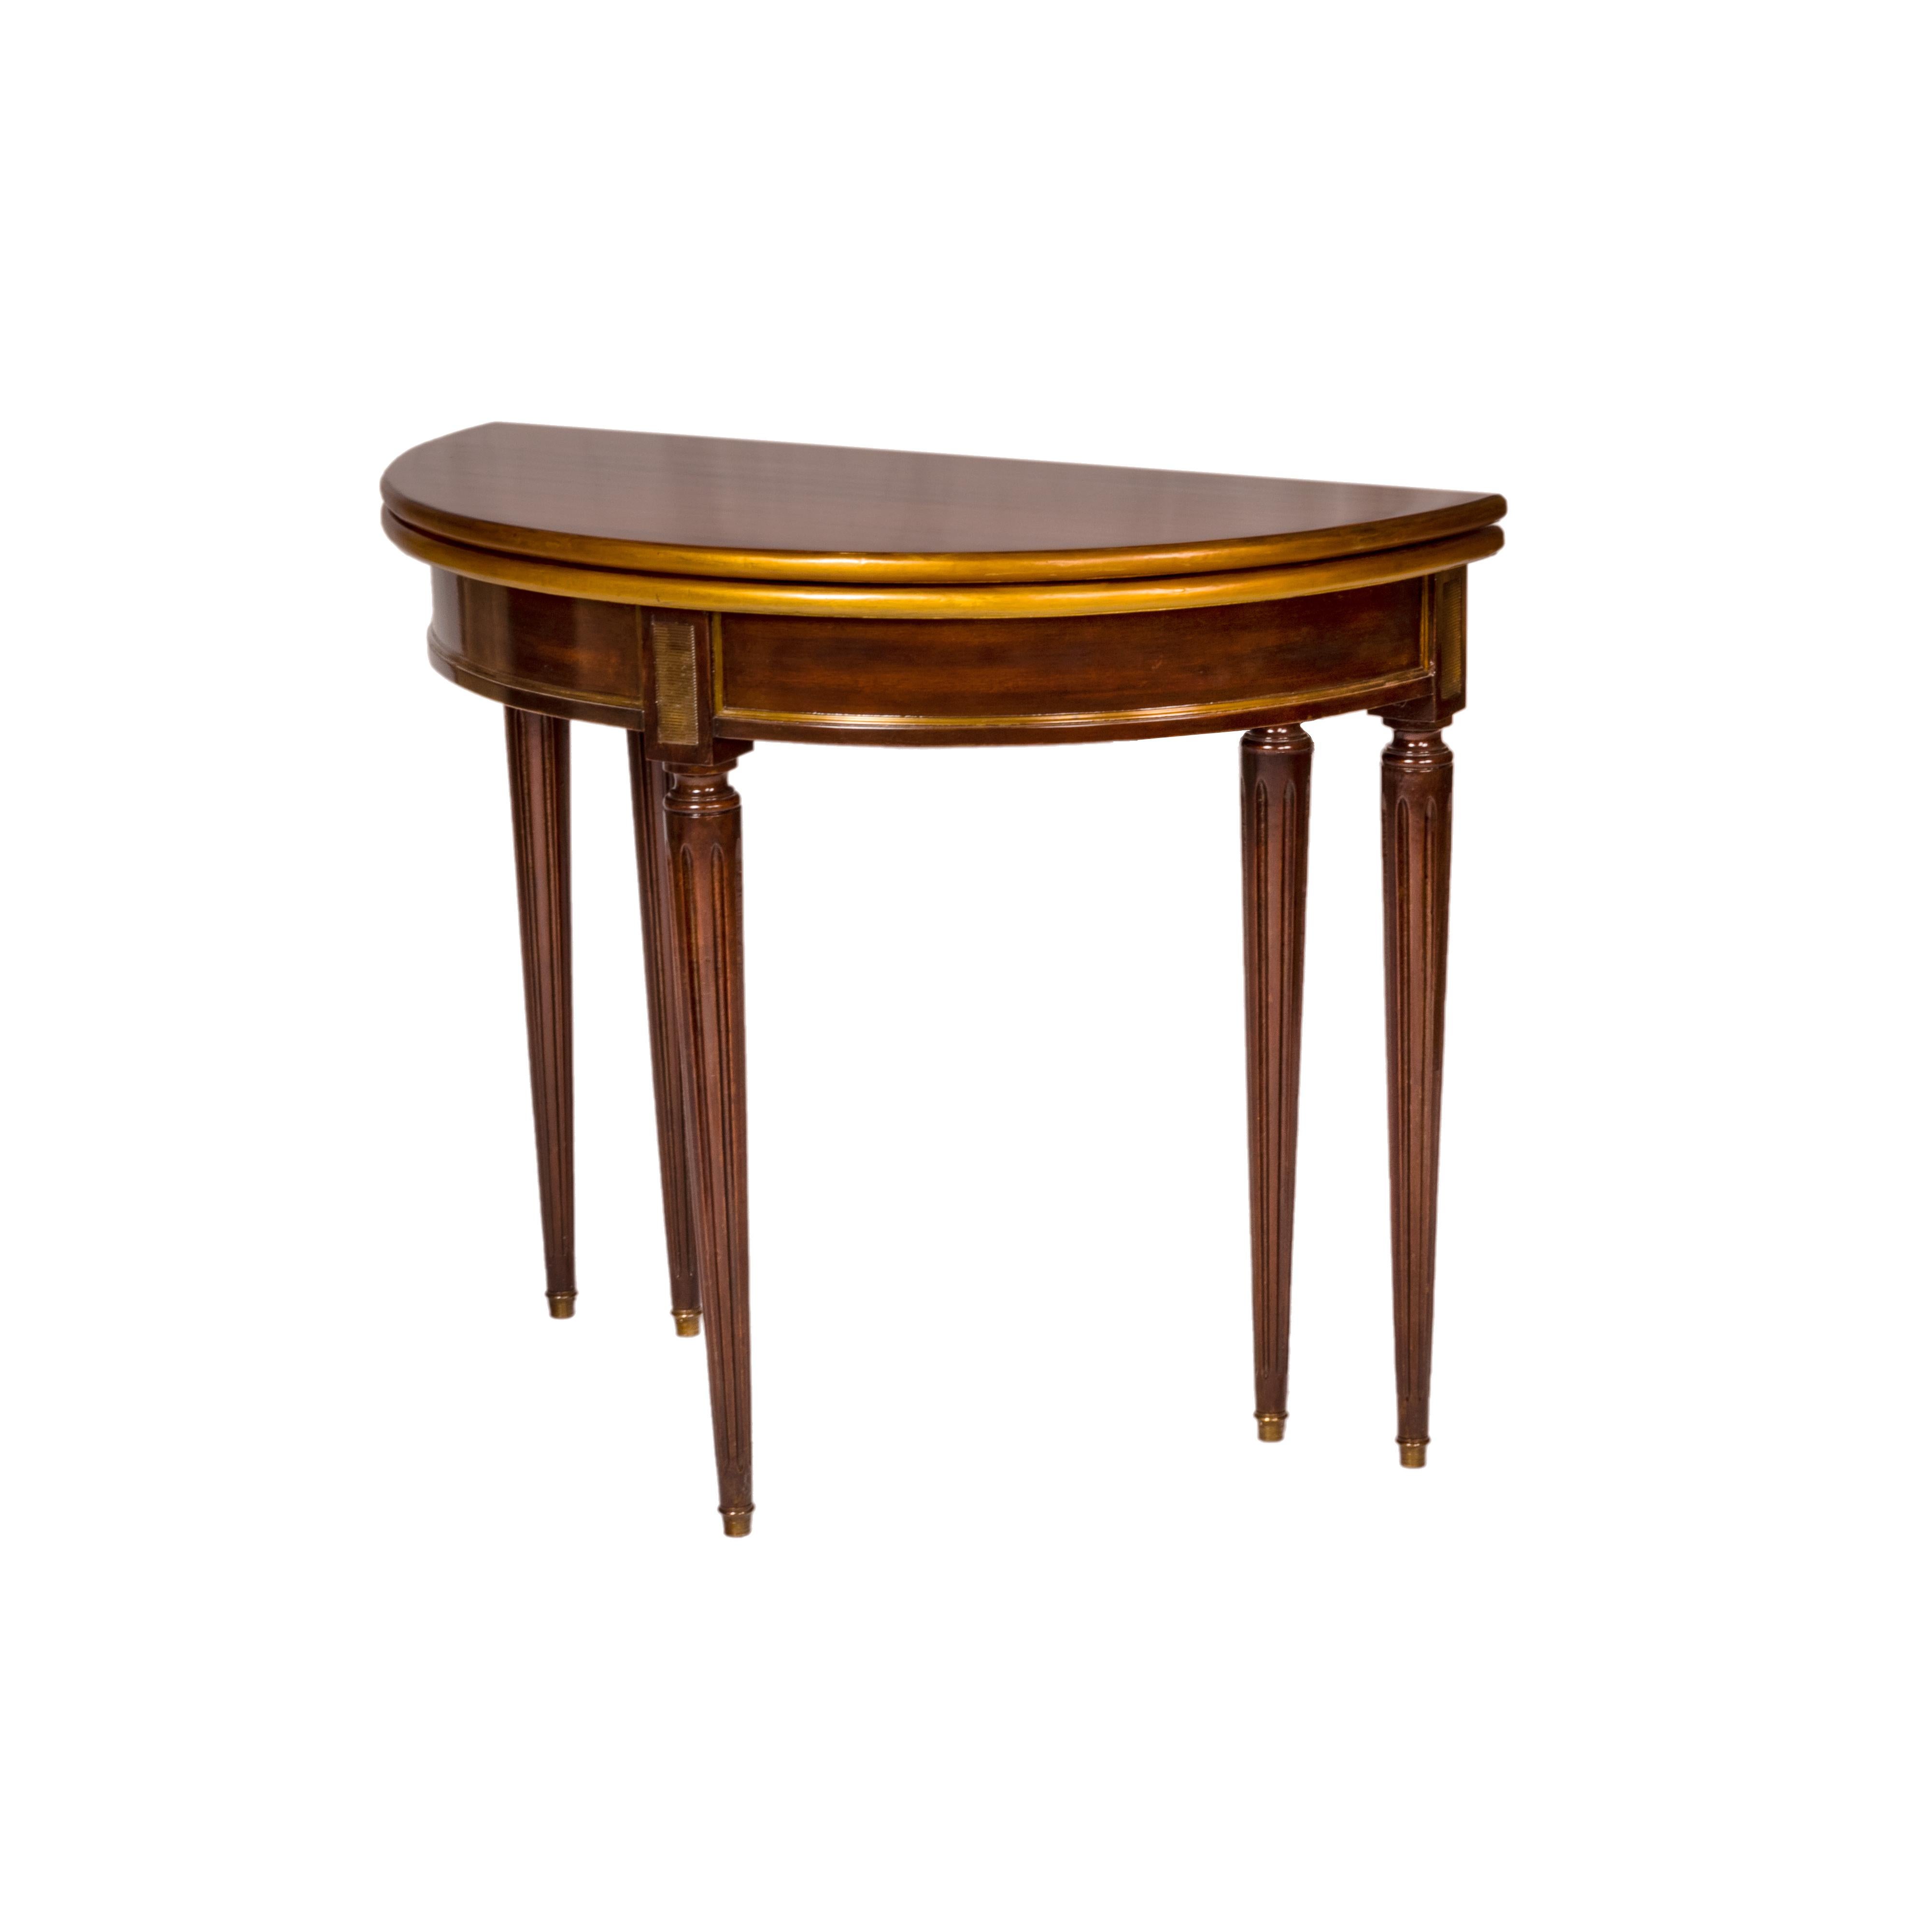 Mahogany dining table in Hepplewhite style, a Maison Jansen Directoire style brass-mounted dining room table with two extensions and extension legs for extra stability.  

*** with two extensions. 

half-moon closed table: 45 x 91 cm
round open